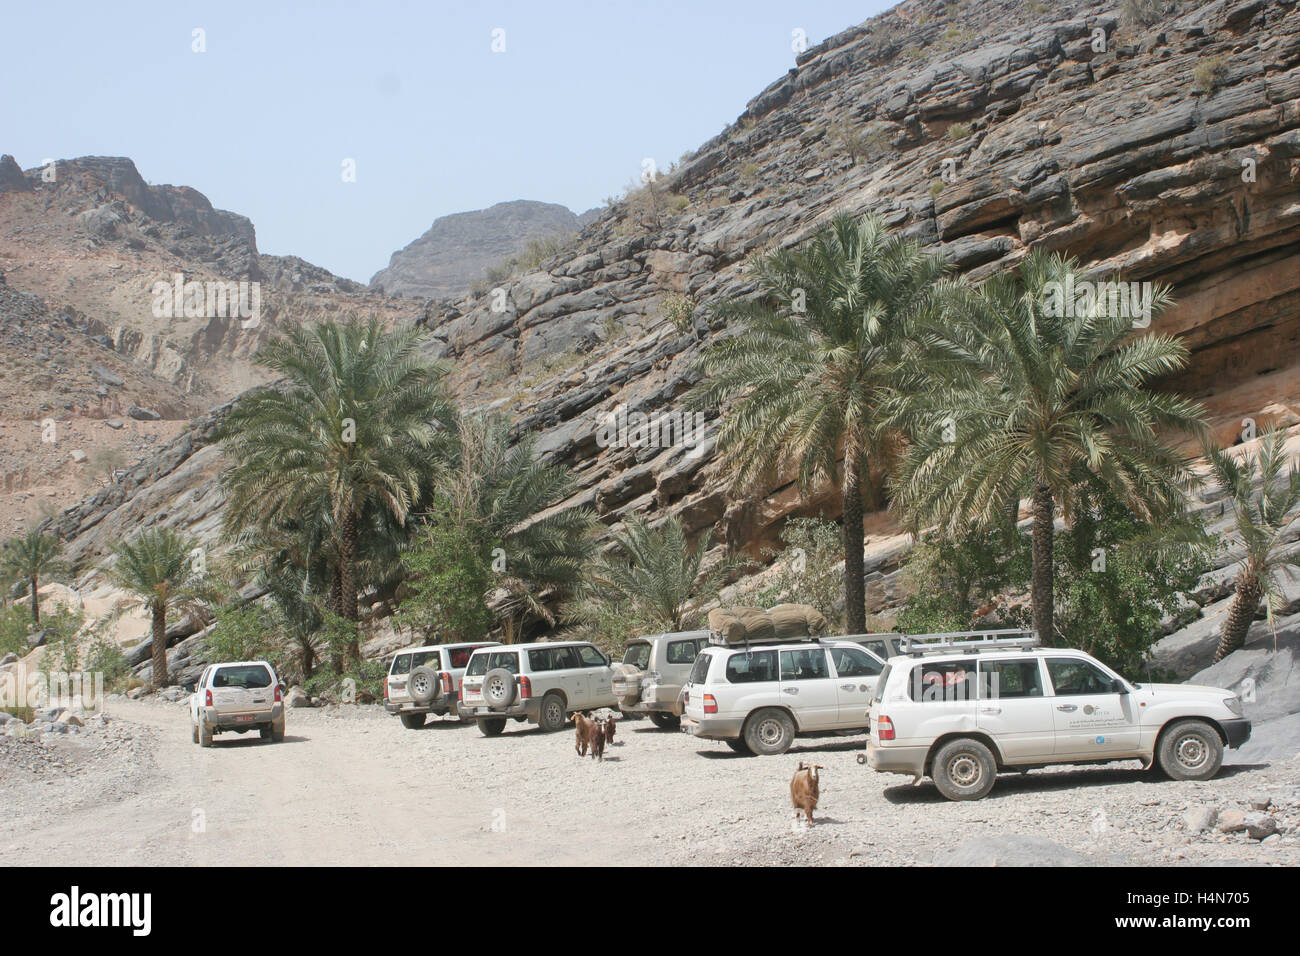 Tourist 4x4 vehicles parked in a gorge in central Oman en route to Nizwa. Wild goats wander amongst the palm trees Stock Photo